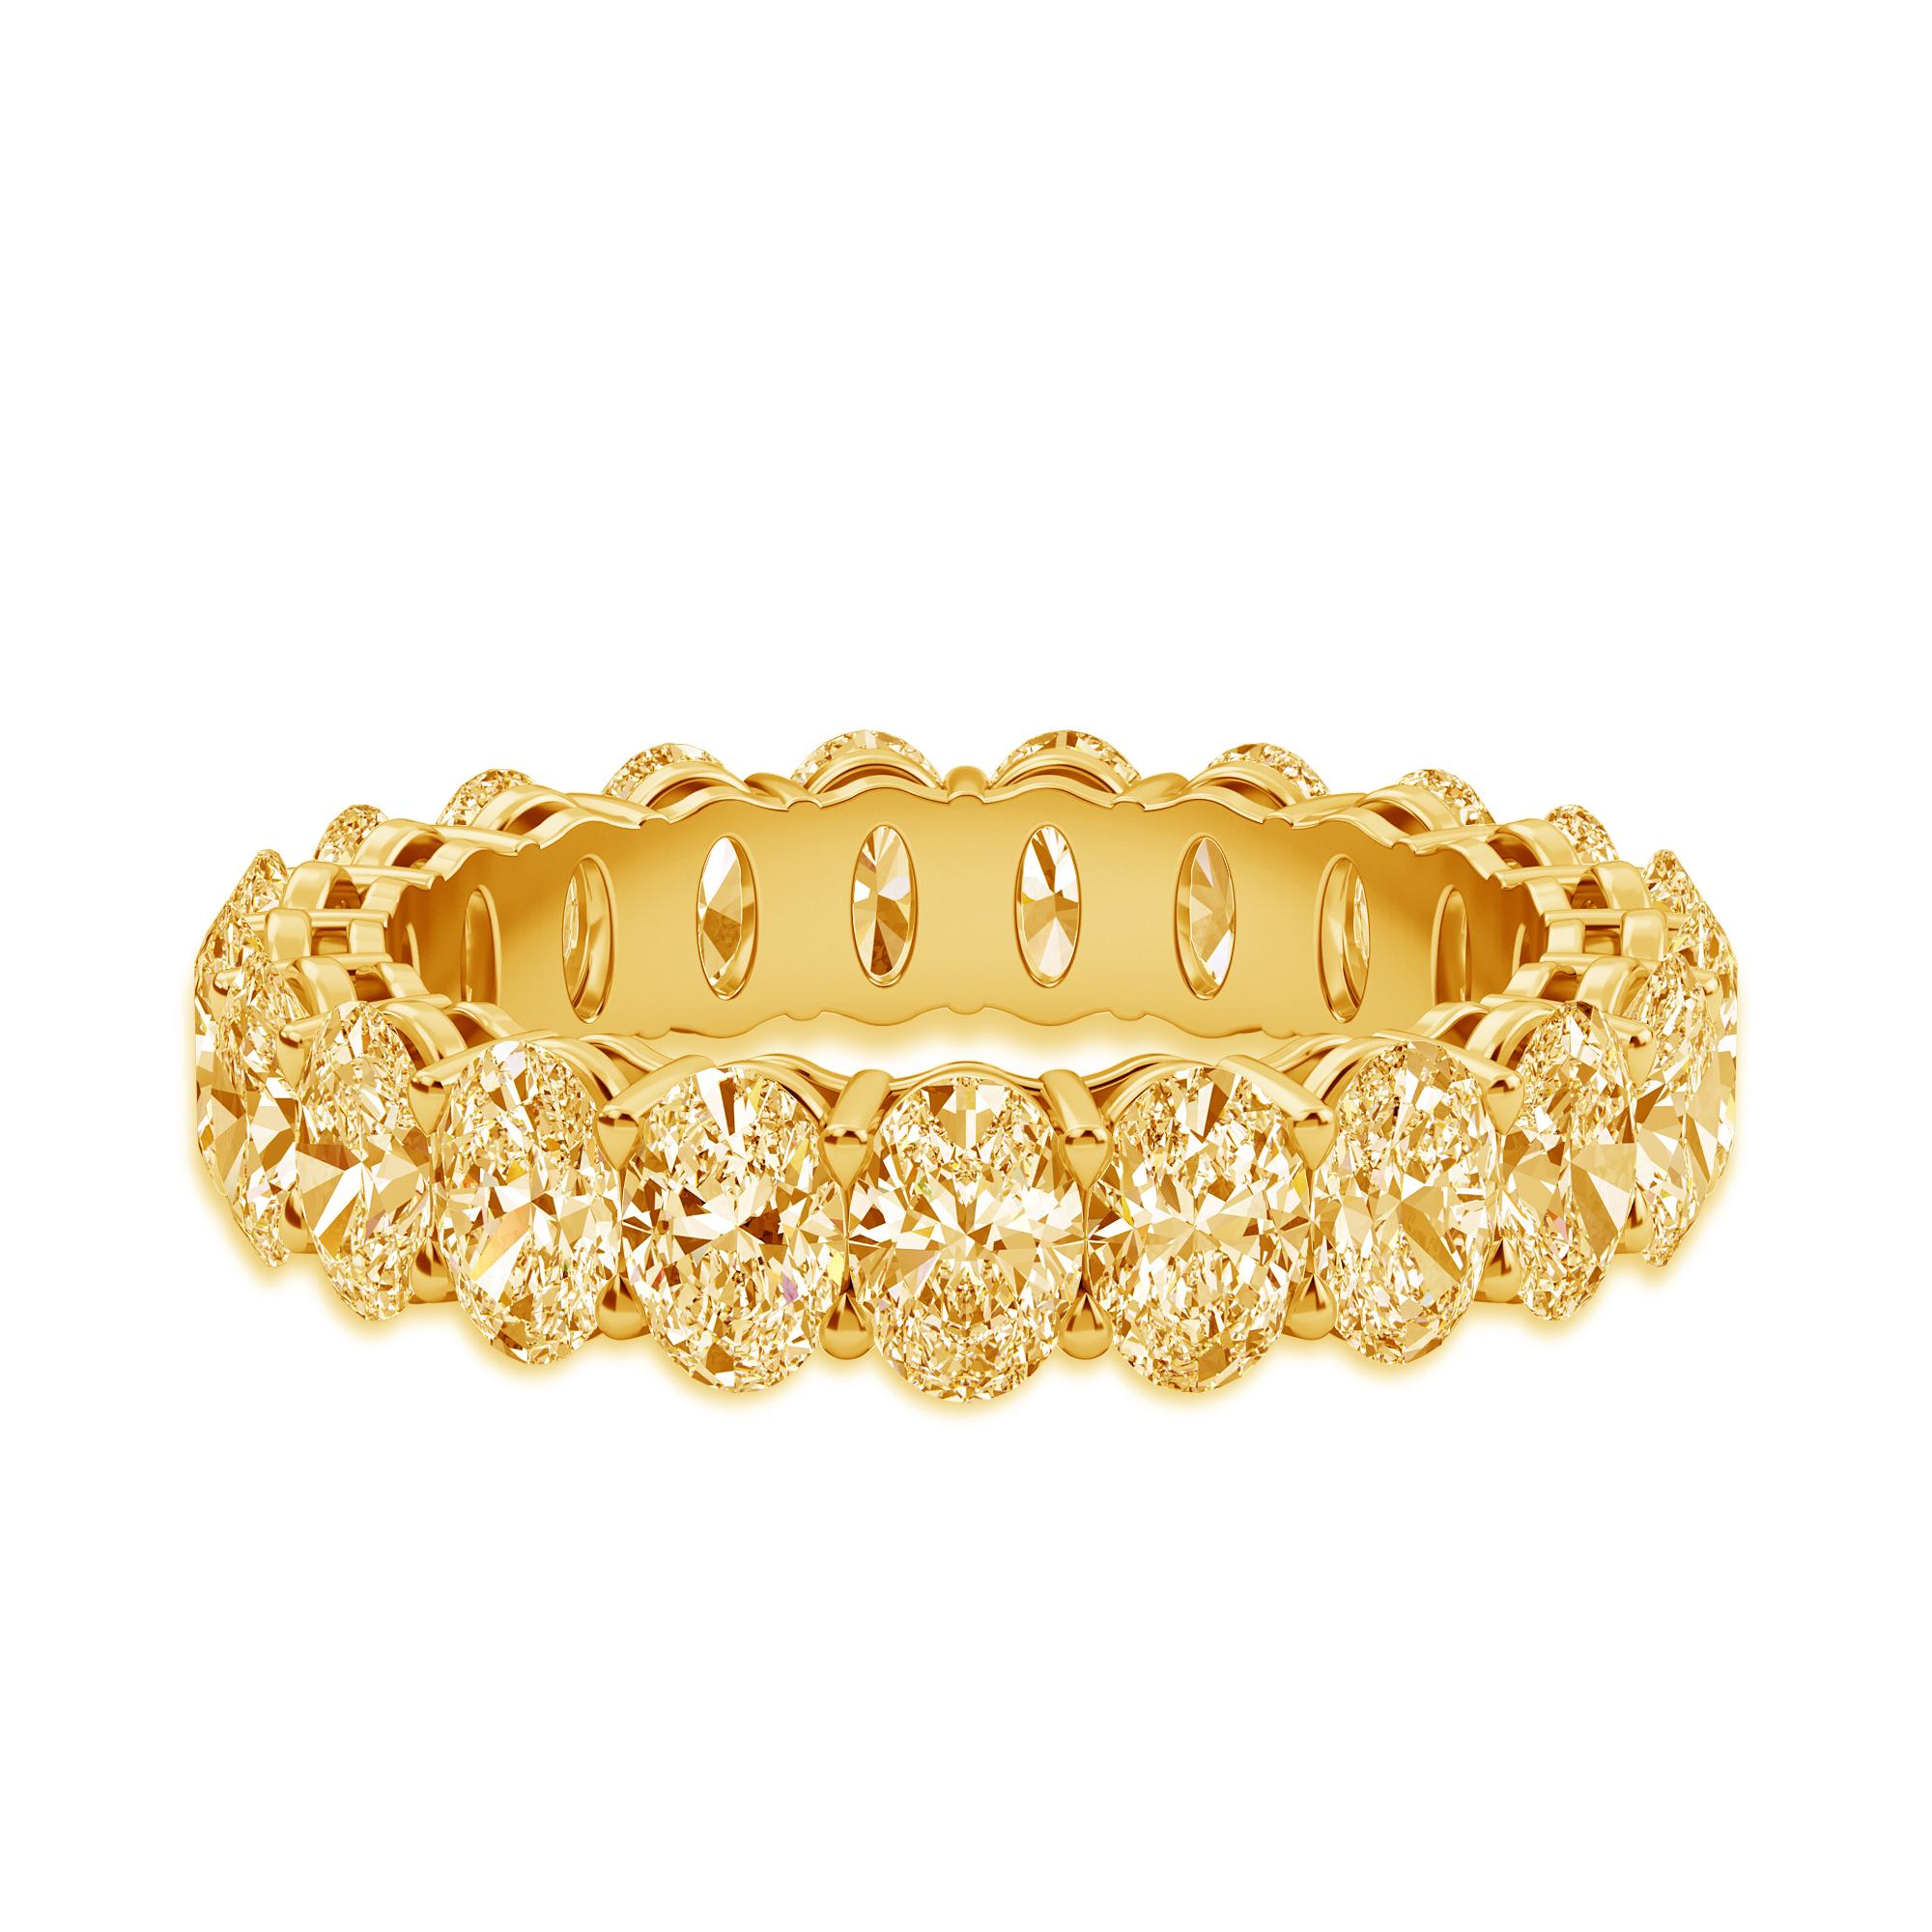 This Oval Band has 21 Diamonds with a total carat weight of 5.48. 
The diamonds are Fancy Intense Yellow Color VS clarity. 
The ring is a finger size 6.5 and is set in 18K Yellow Gold.